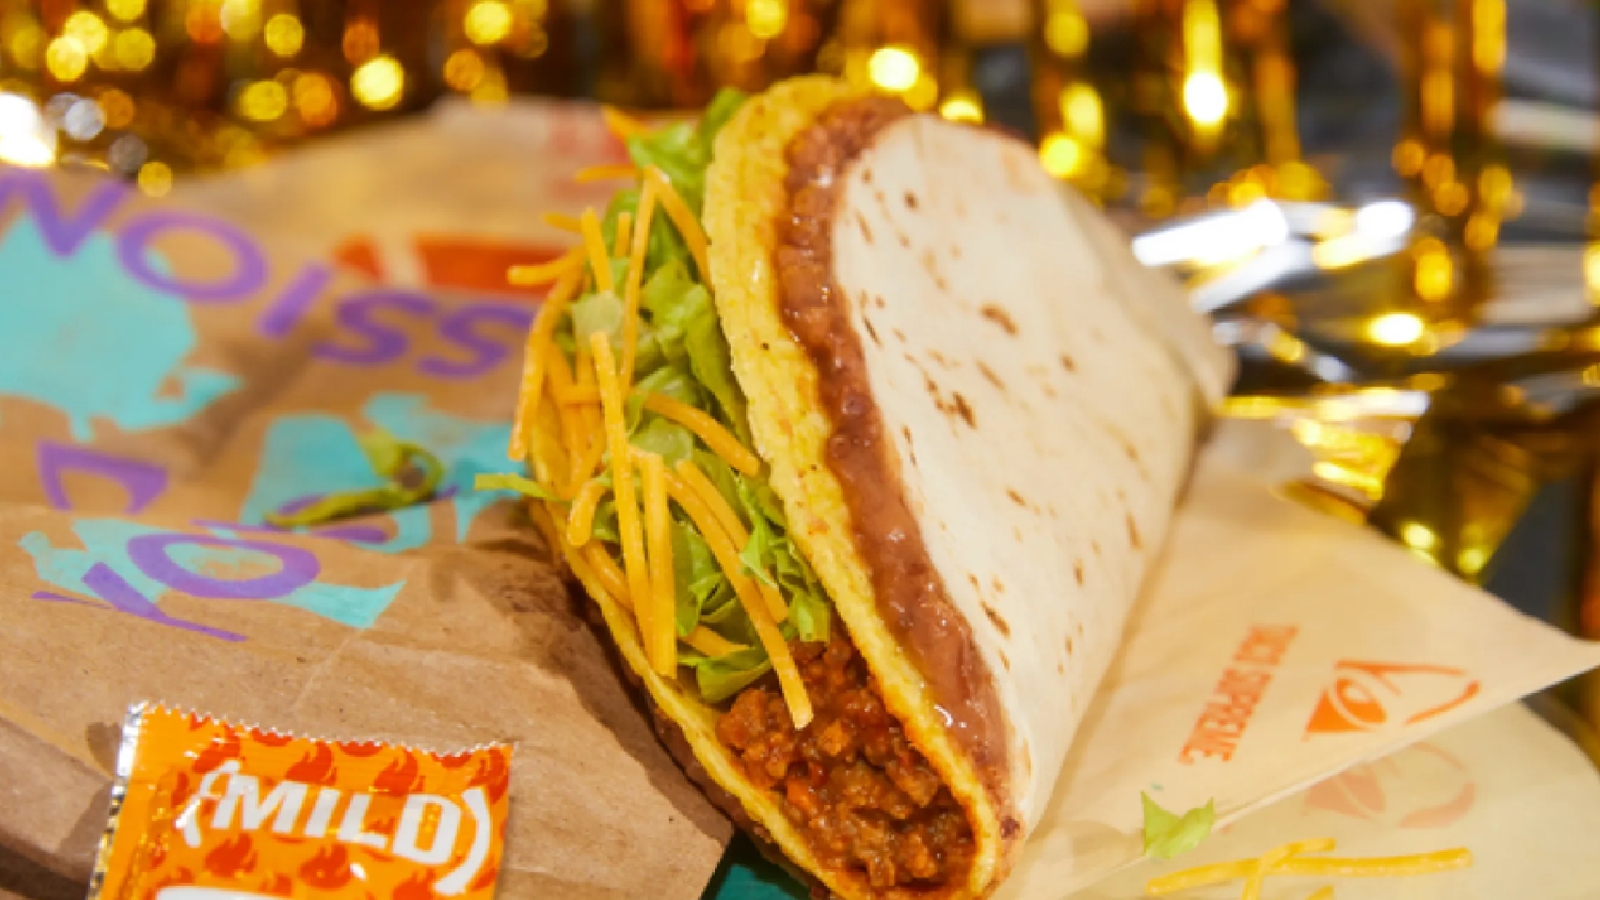 Taco Bell’s famous beef recipe revealed and surprises customers